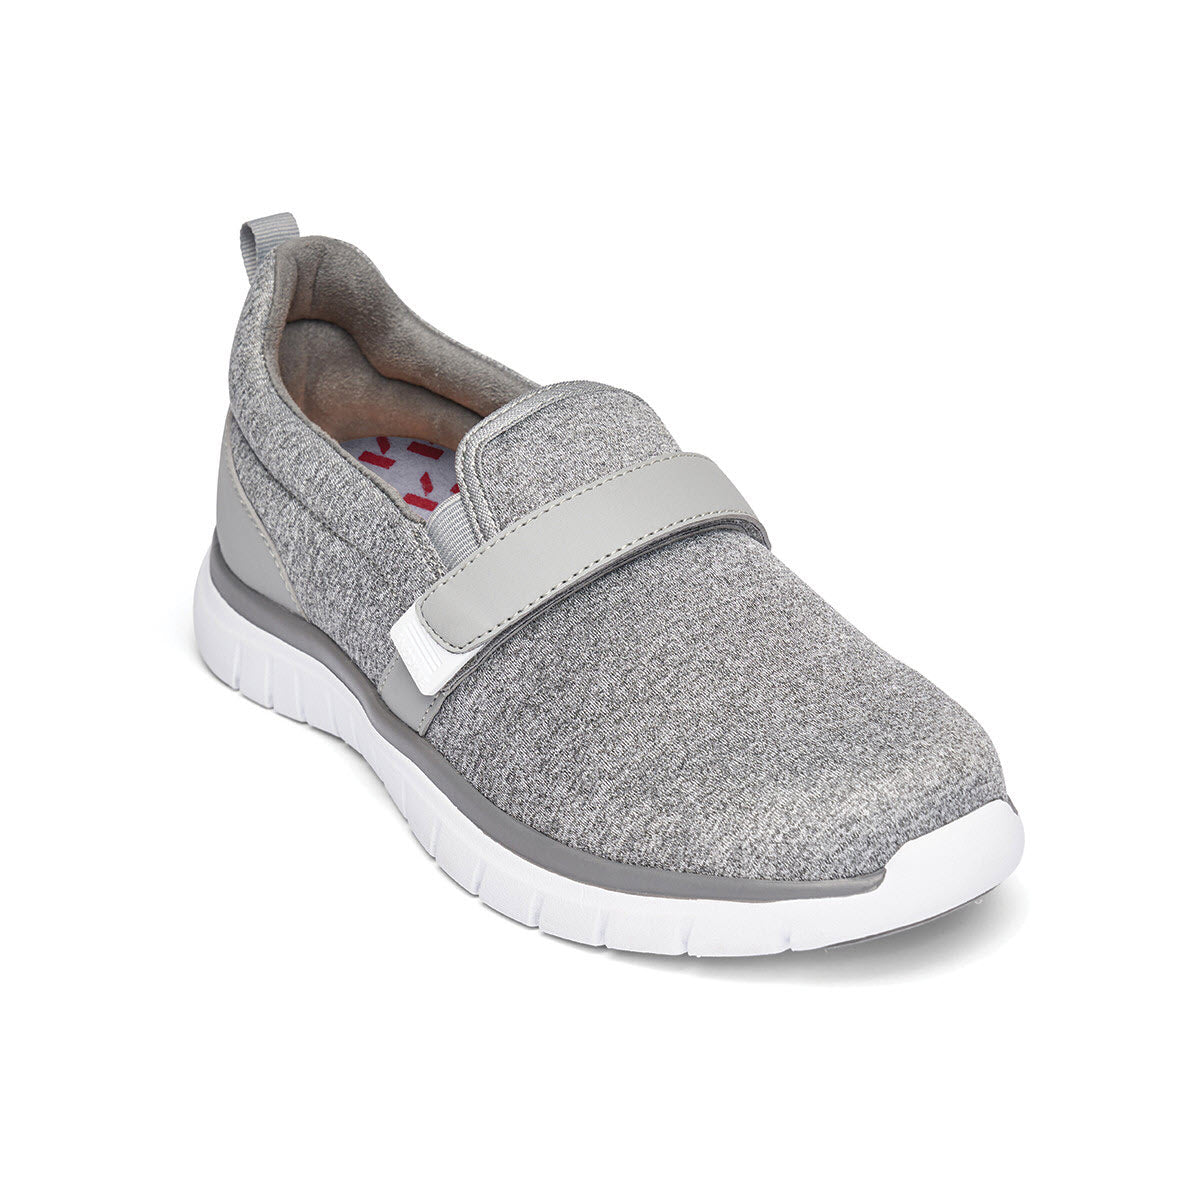 Gray ANODYNE sport trainer with Velcro strap and white sole, designed for orthopedic inserts.